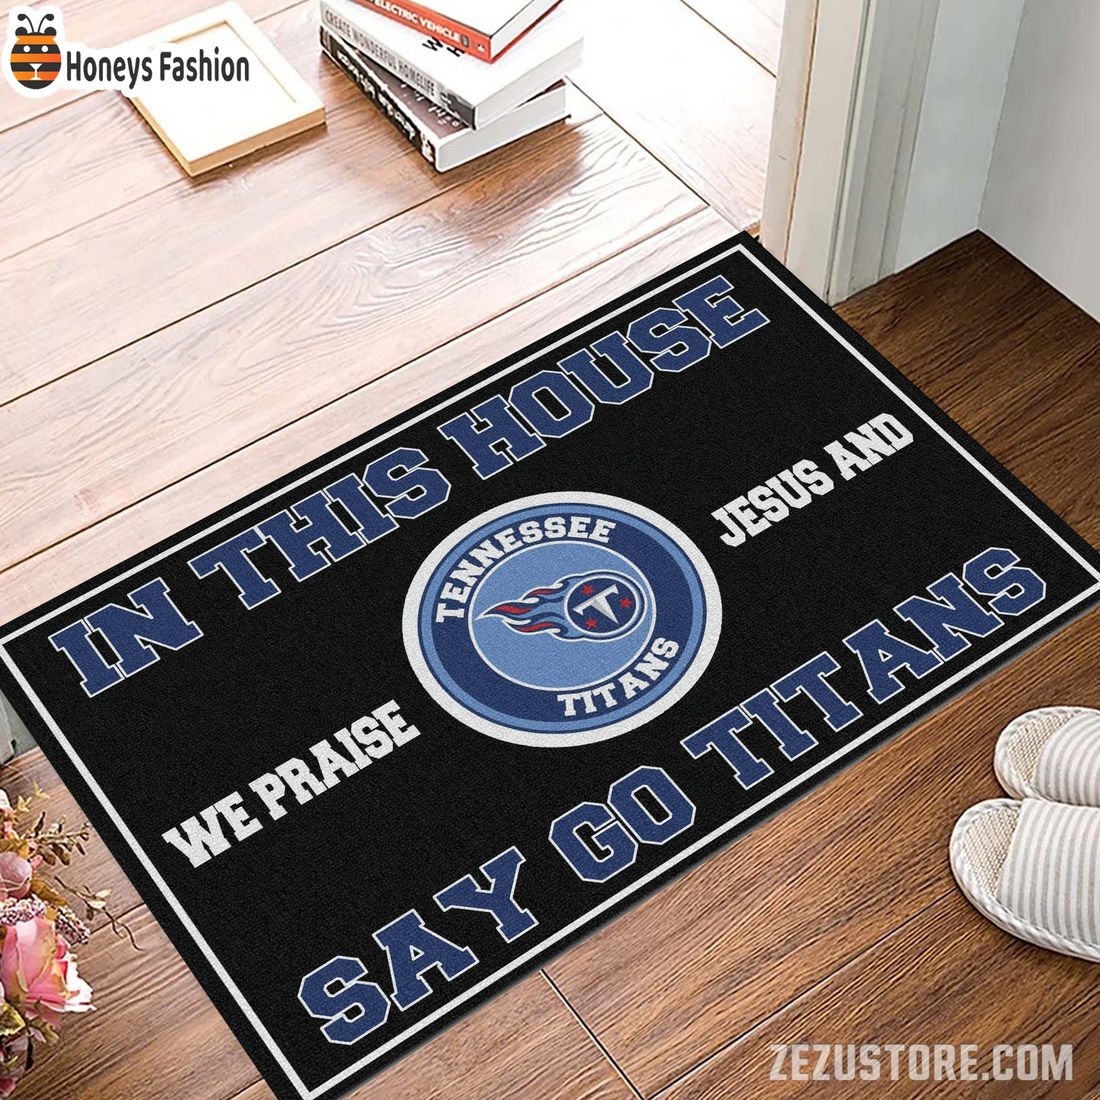 In this house we praise jesus and say go Titans doormat